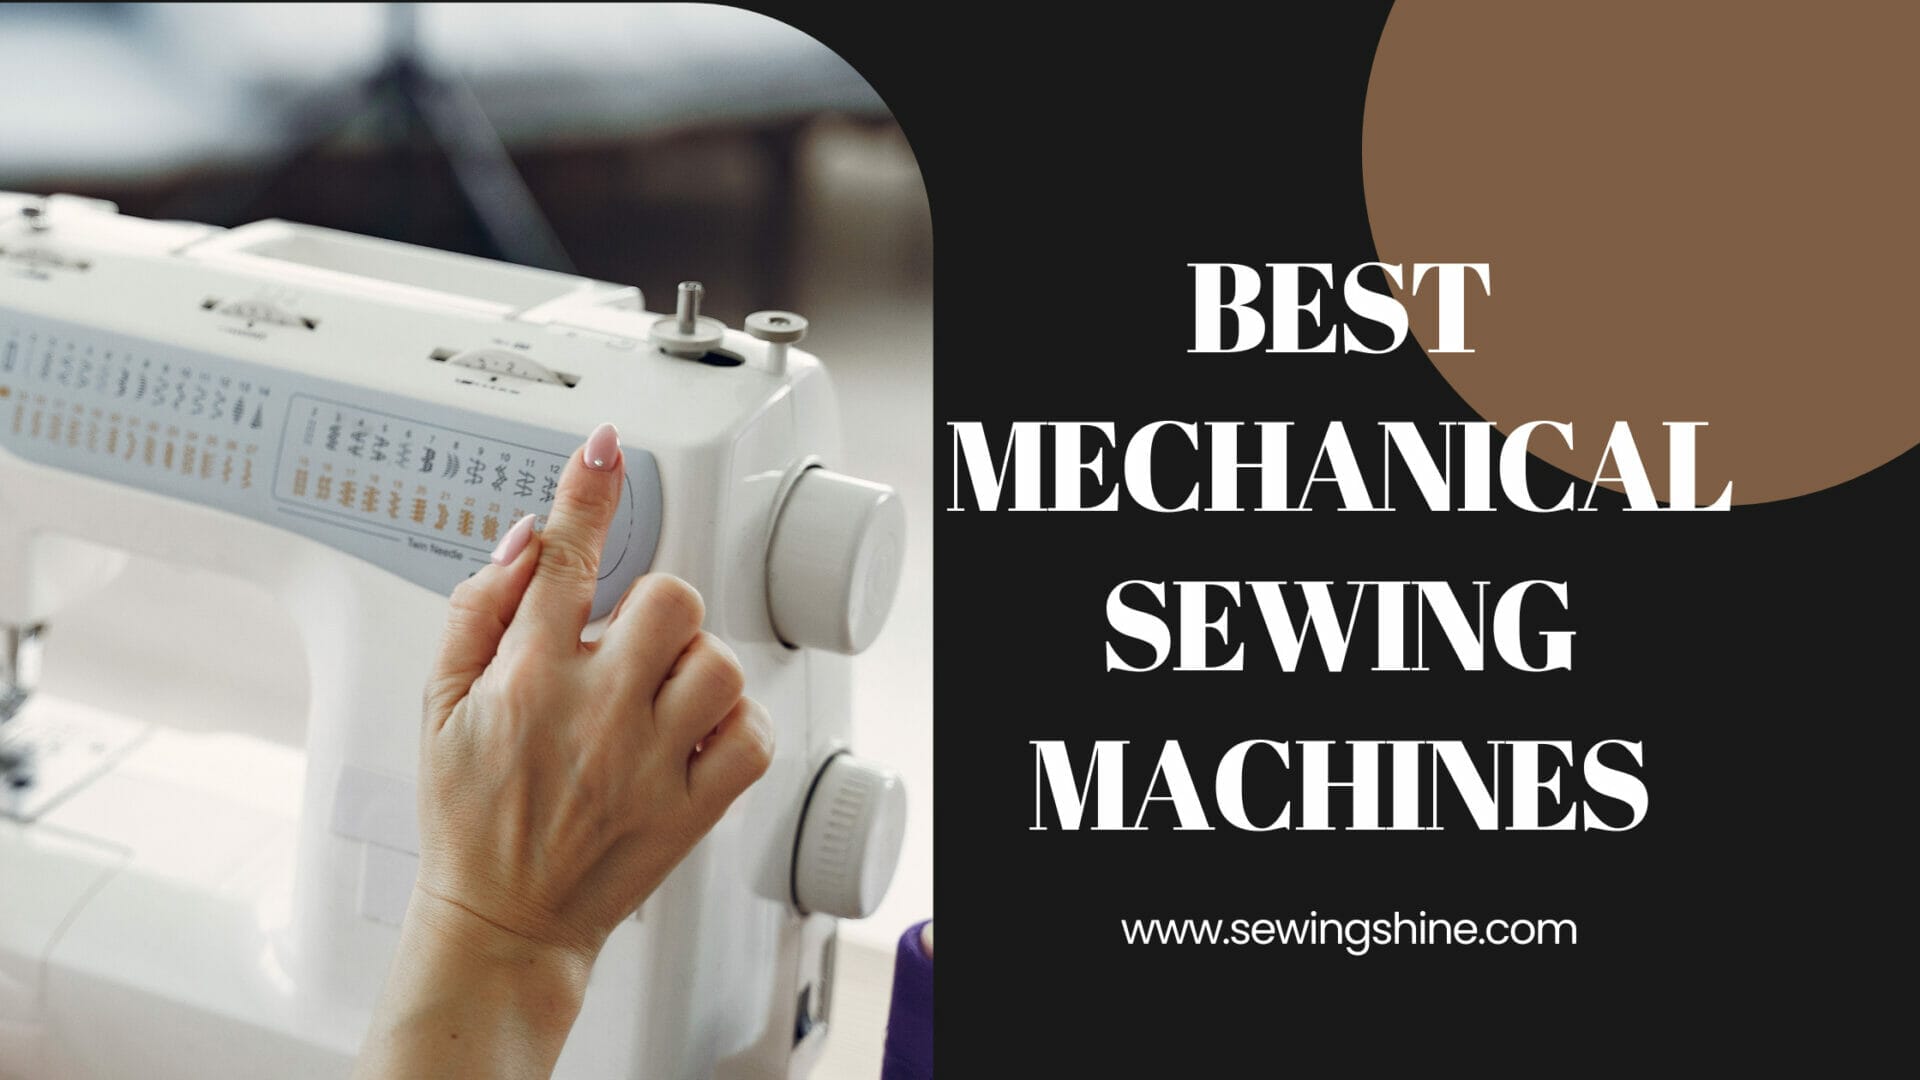 Best Mechanical Sewing Machines